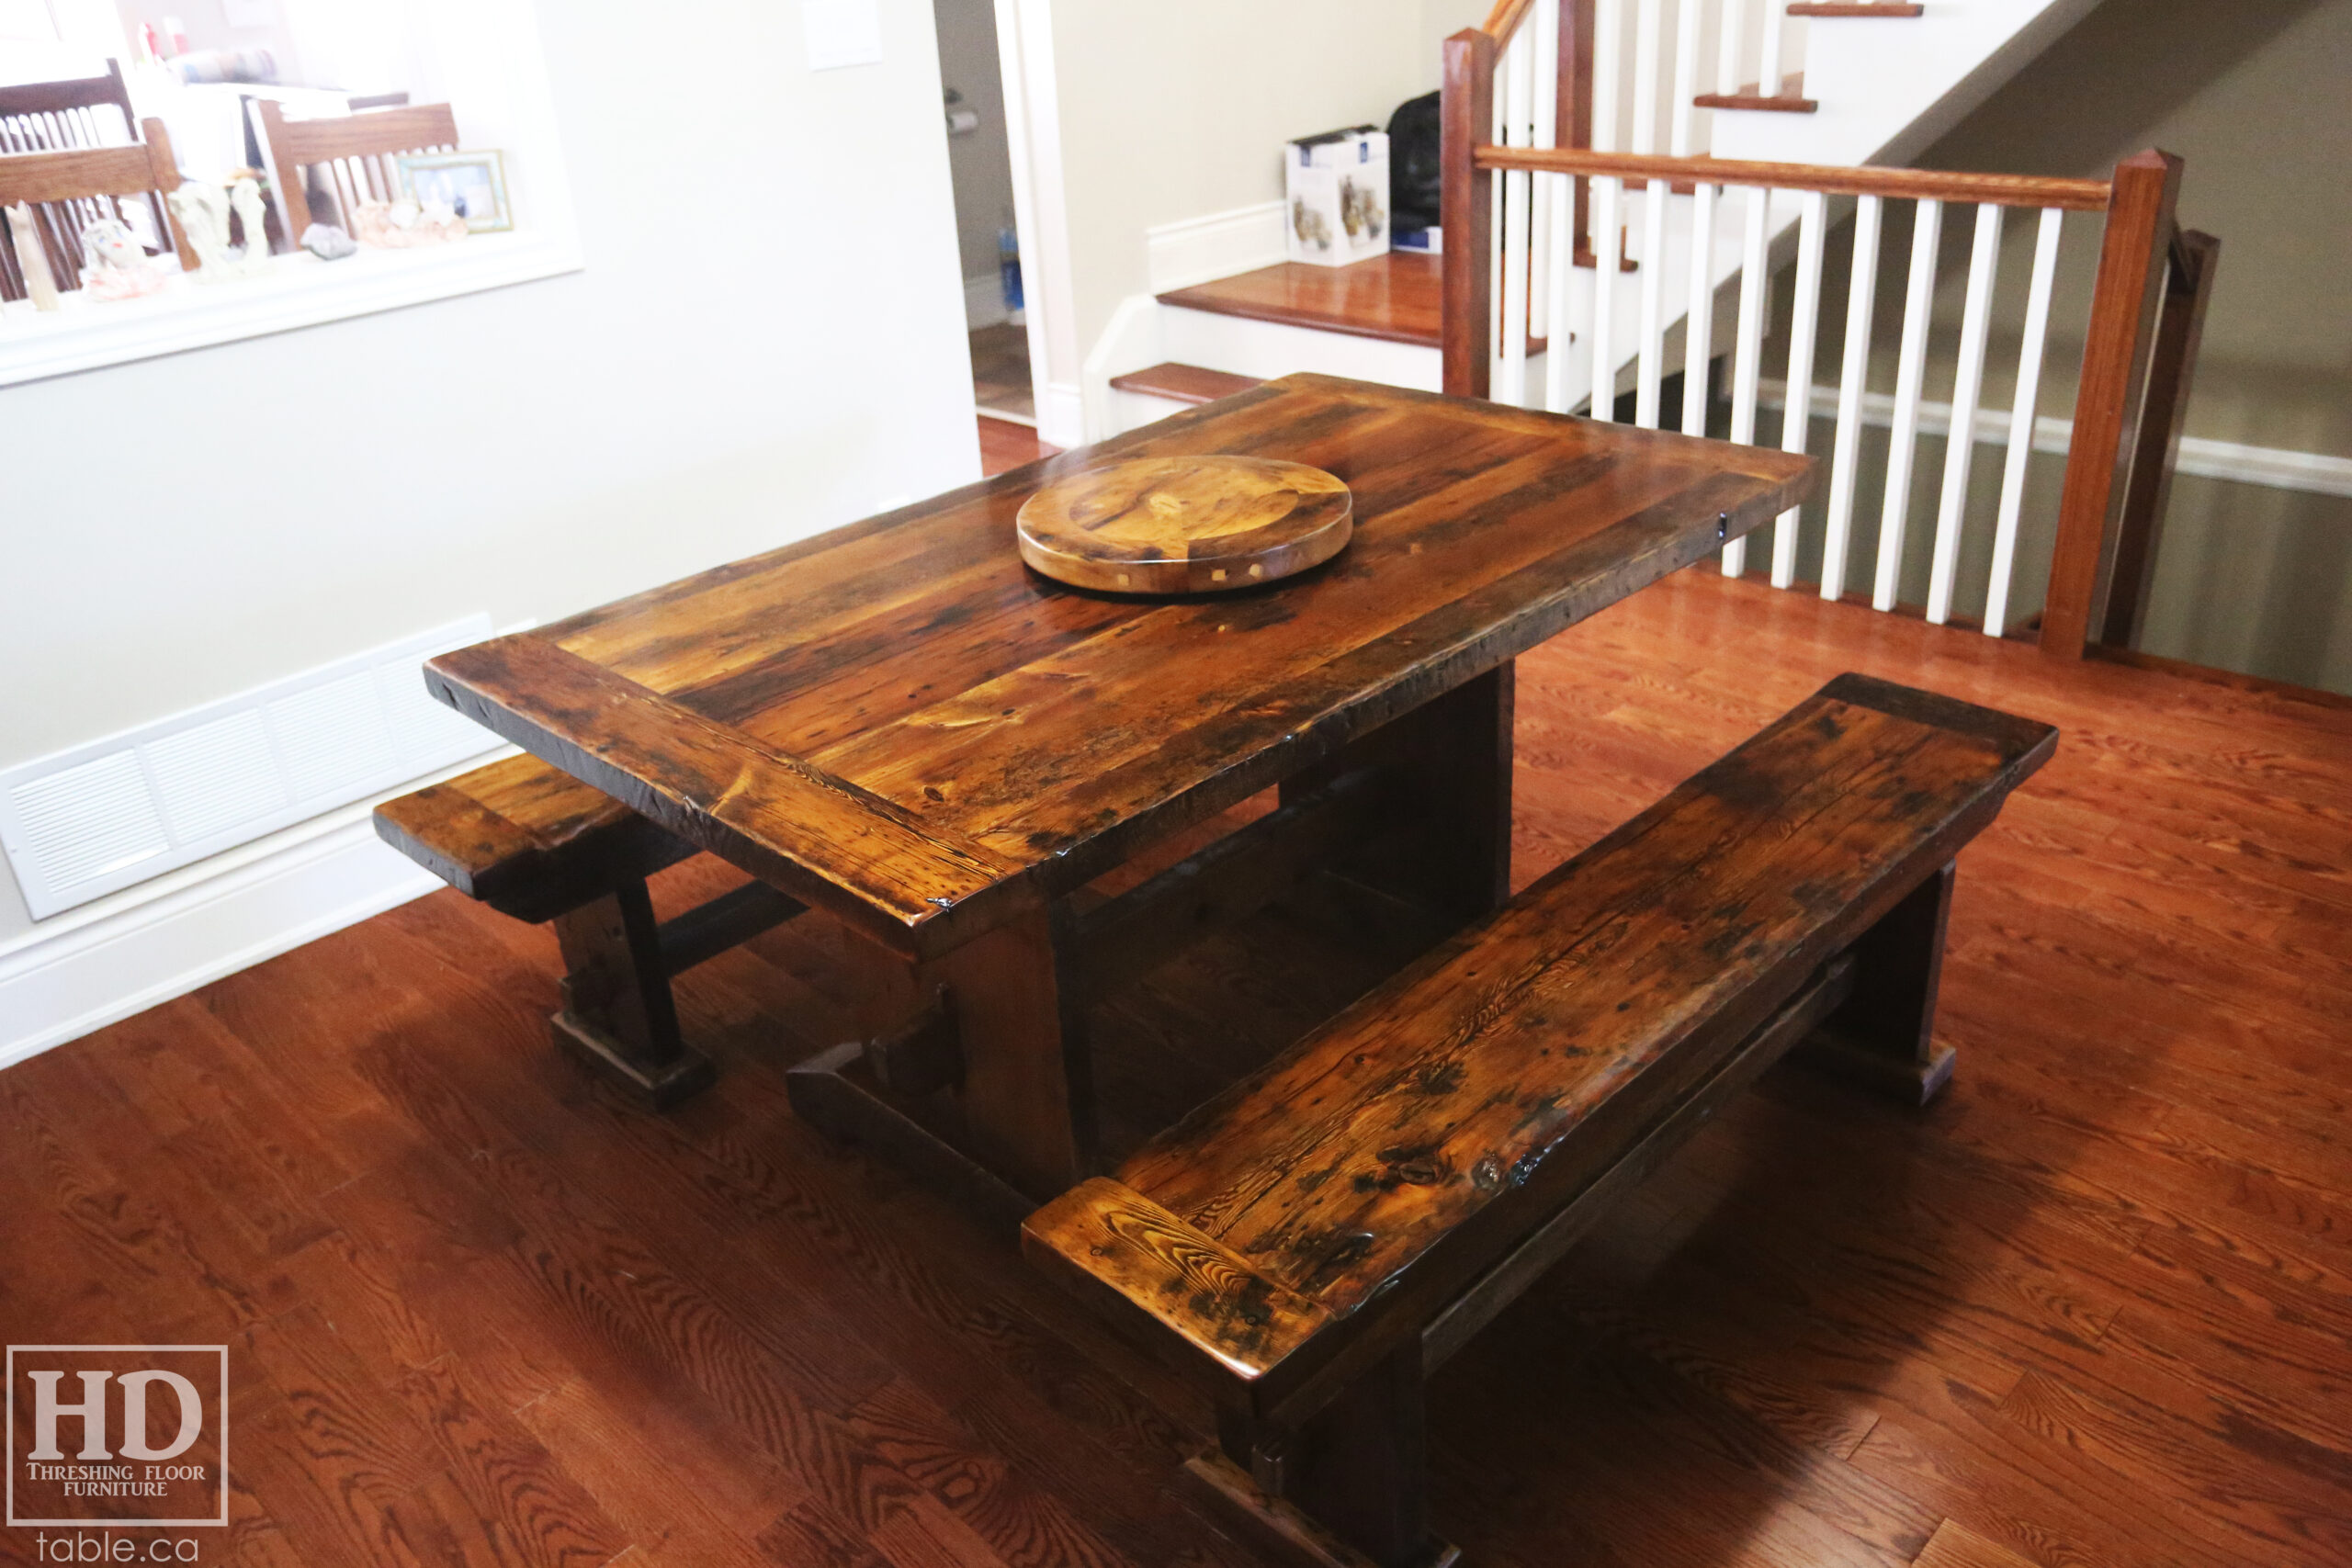 Rustic Table & Benches & Lazy Susan made from Ontario Pioneer Barns by HD Threshing Floor Furniture / www.table.ca